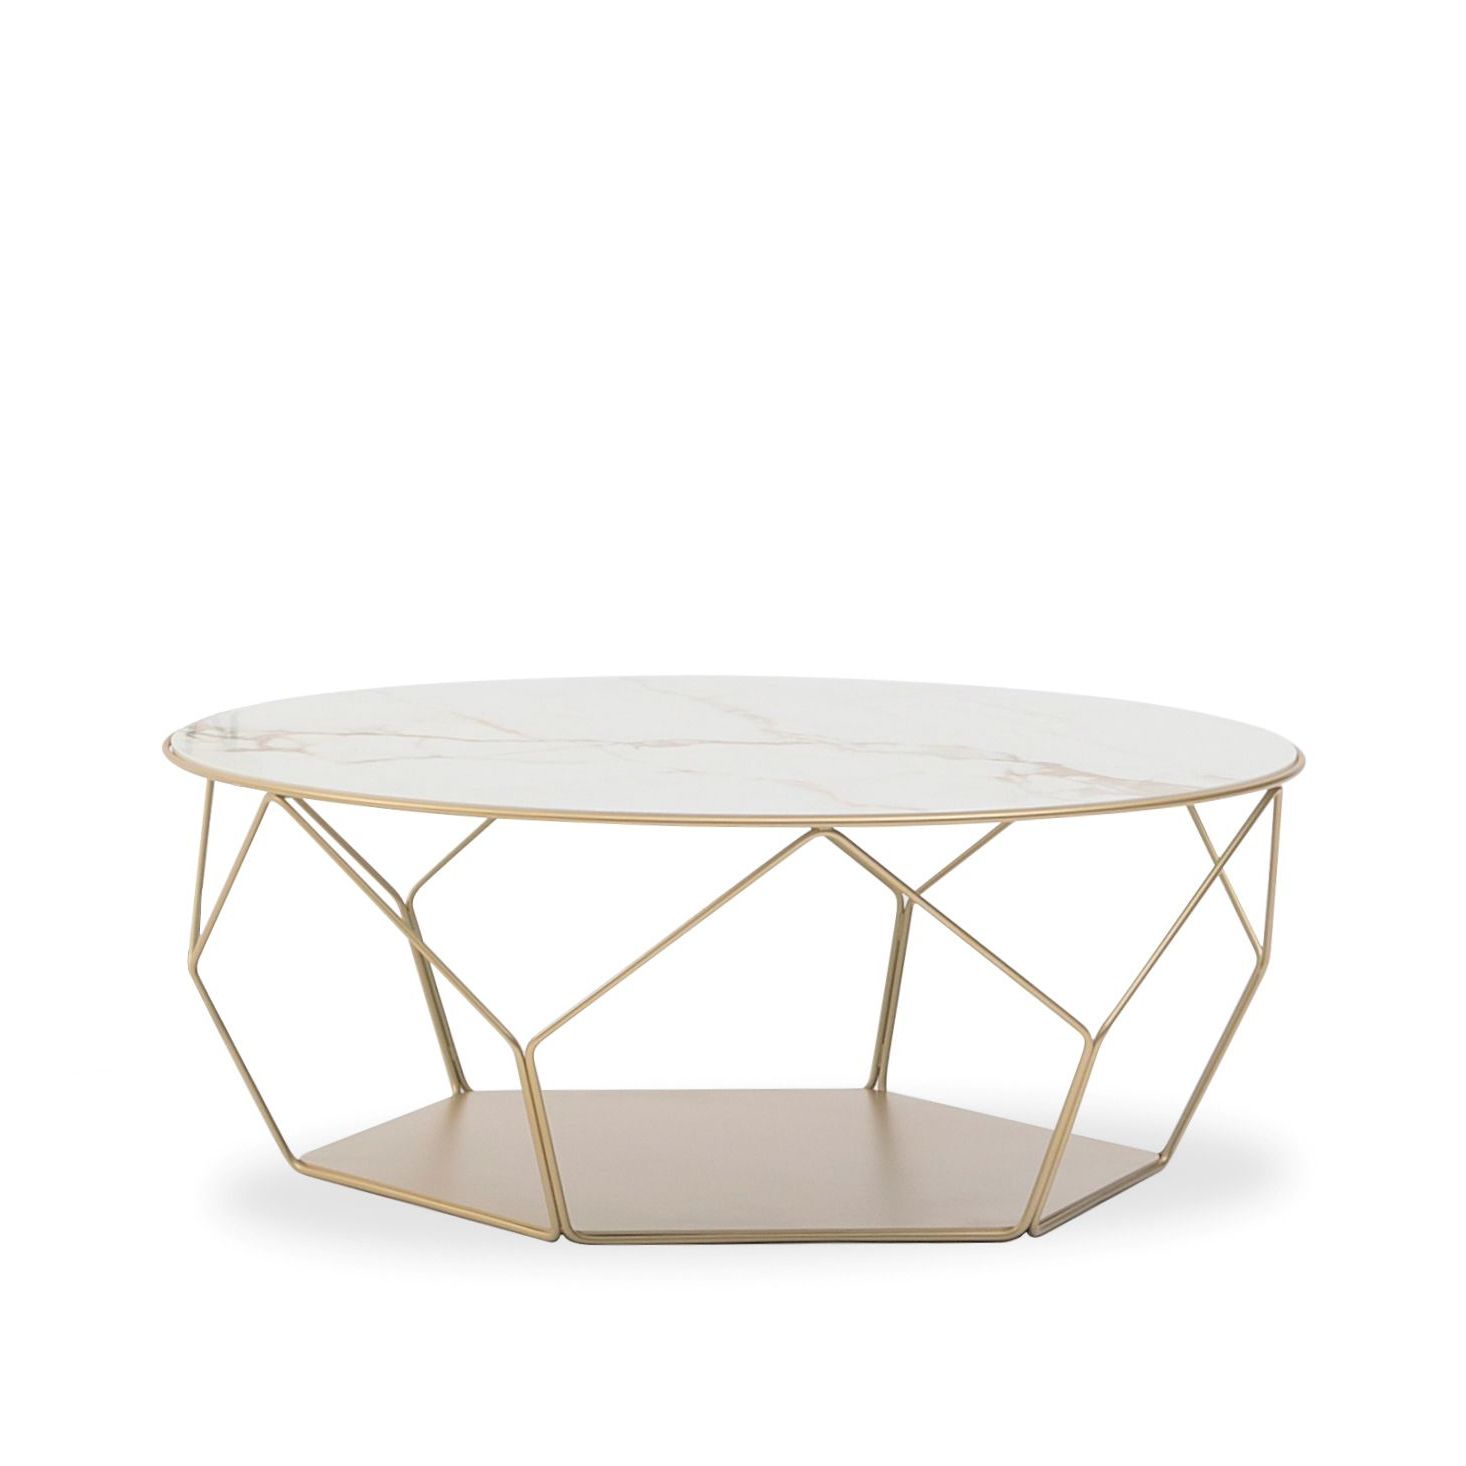 Arbor 97 – Bonaldo Coffee Table With Metal Base, Ø 97 Cm, Wide Range Of  Colours And Finishes Available (View 17 of 20)